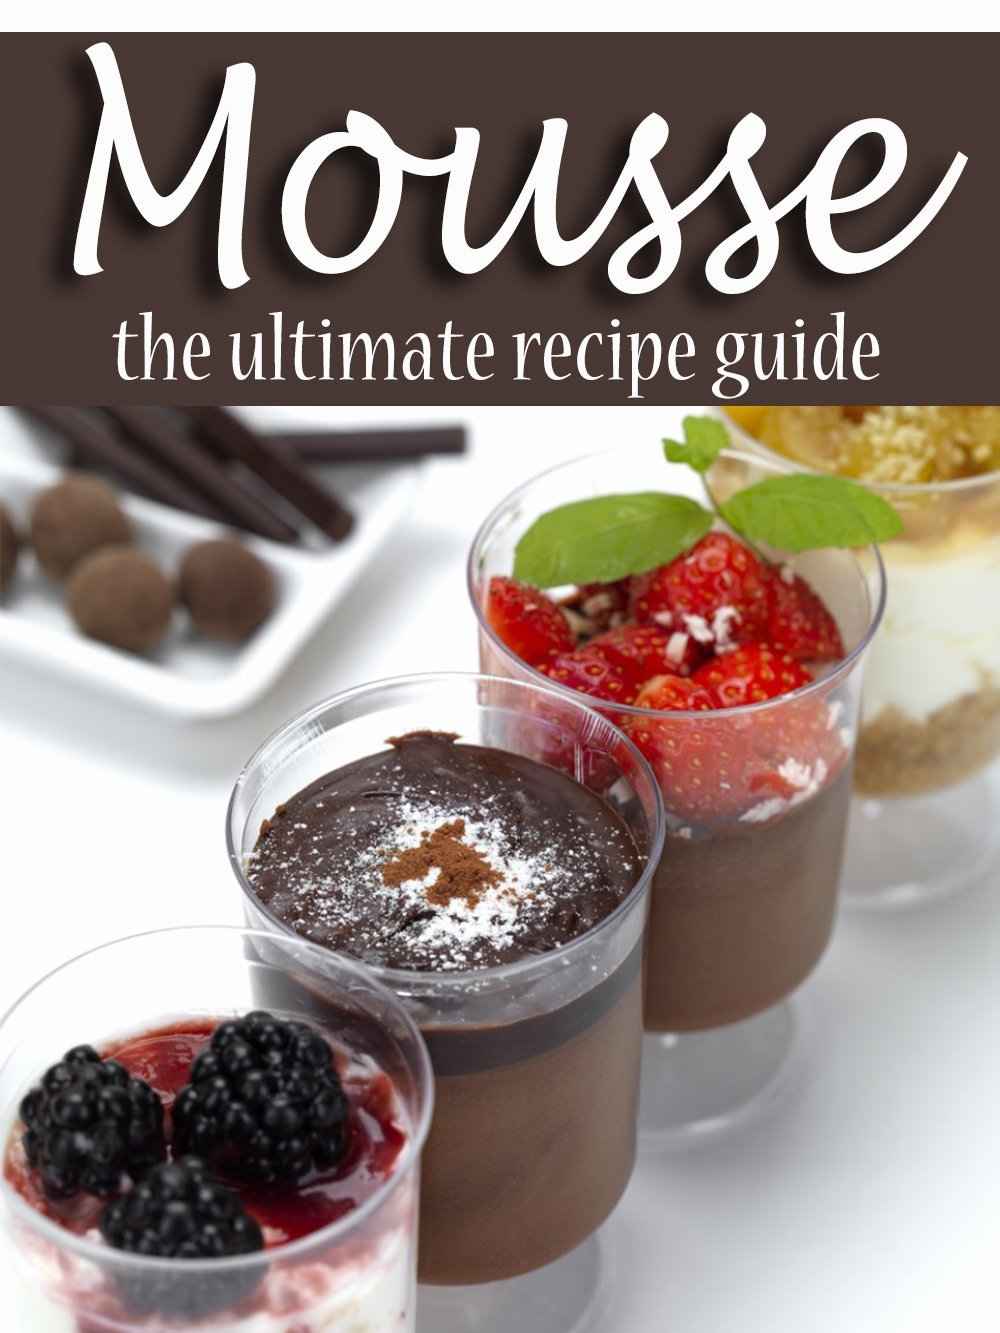 Mousse – The Ultimate Recipe Guide by Terri Smitheen